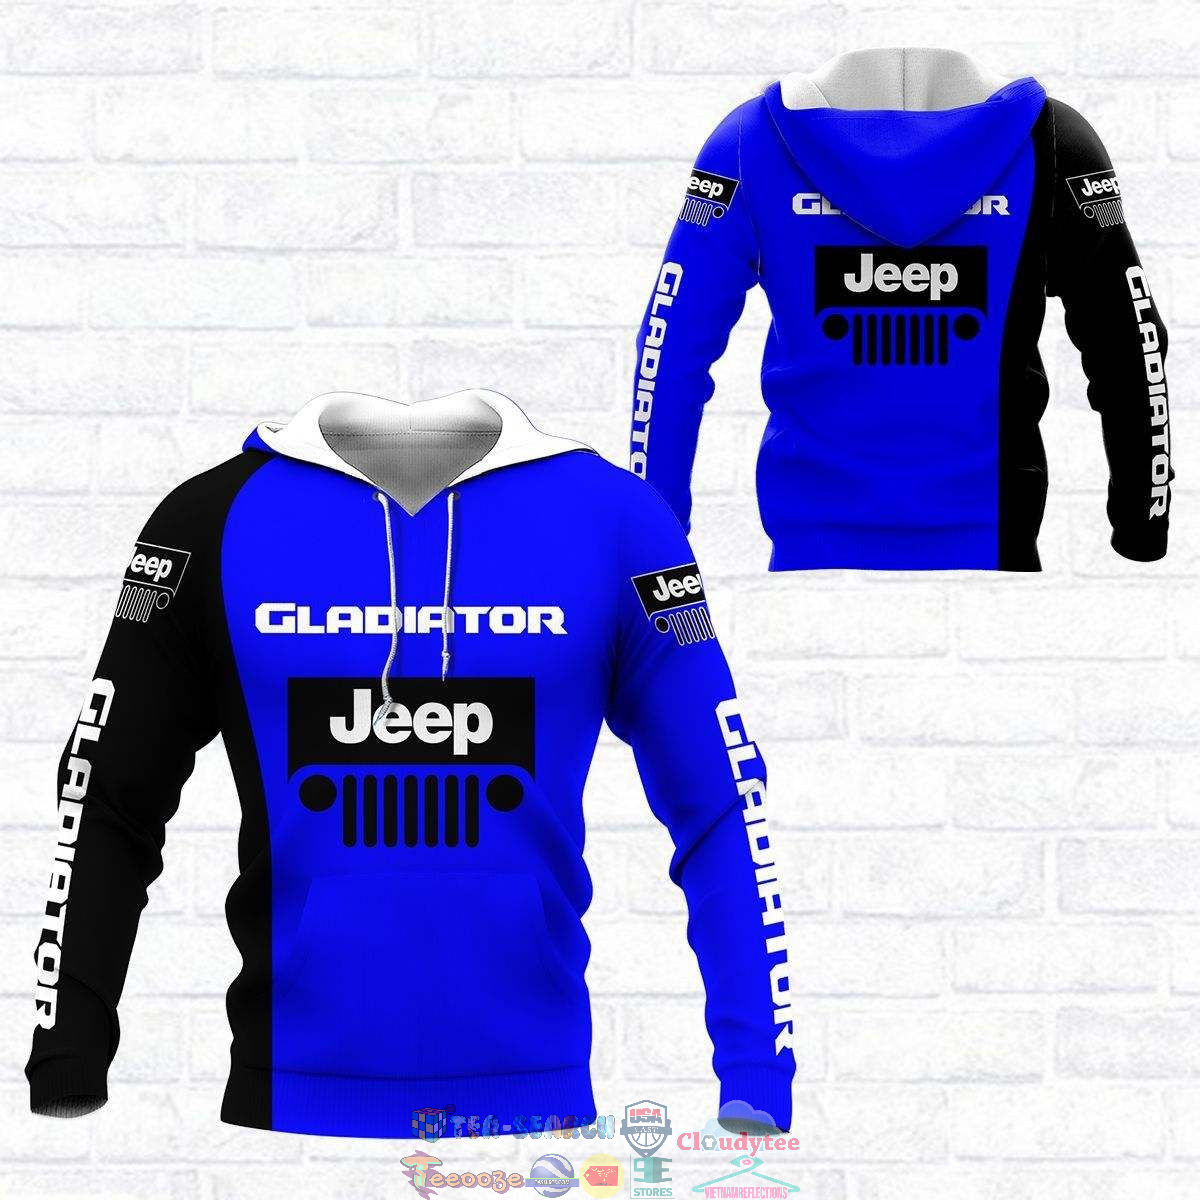 Jeep Gladiator ver 15 3D hoodie and t-shirt